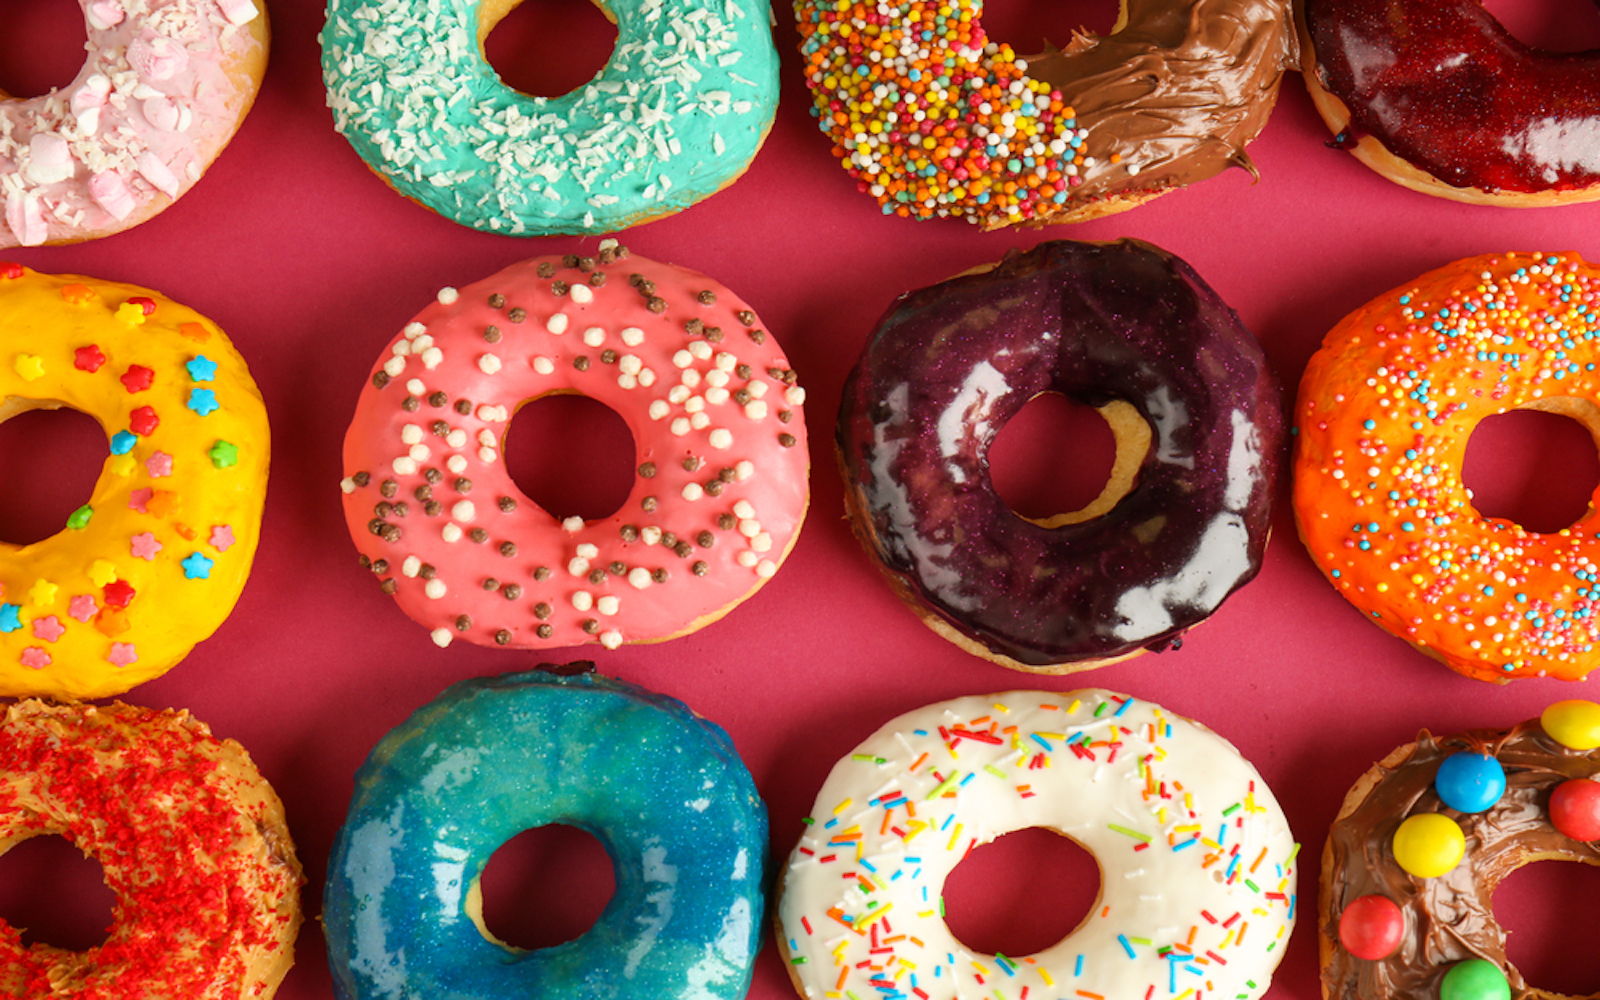 A variety of donuts set against a red background